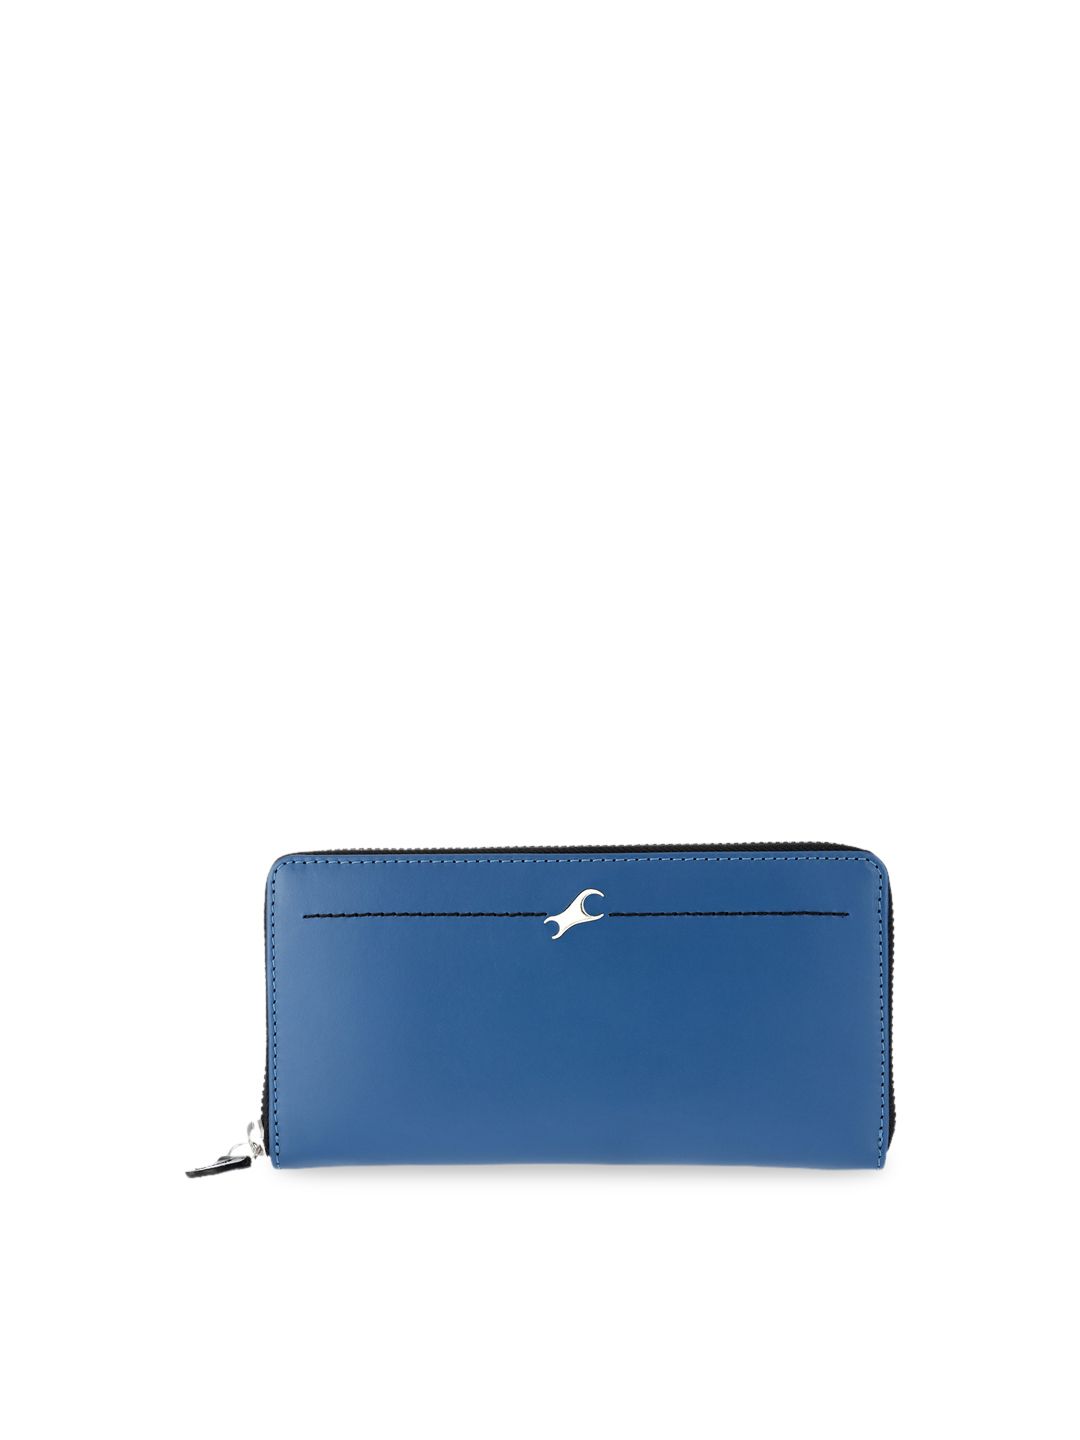 Fastrack Women Blue & Black Colourblocked Leather Zip Around Wallet Price in India